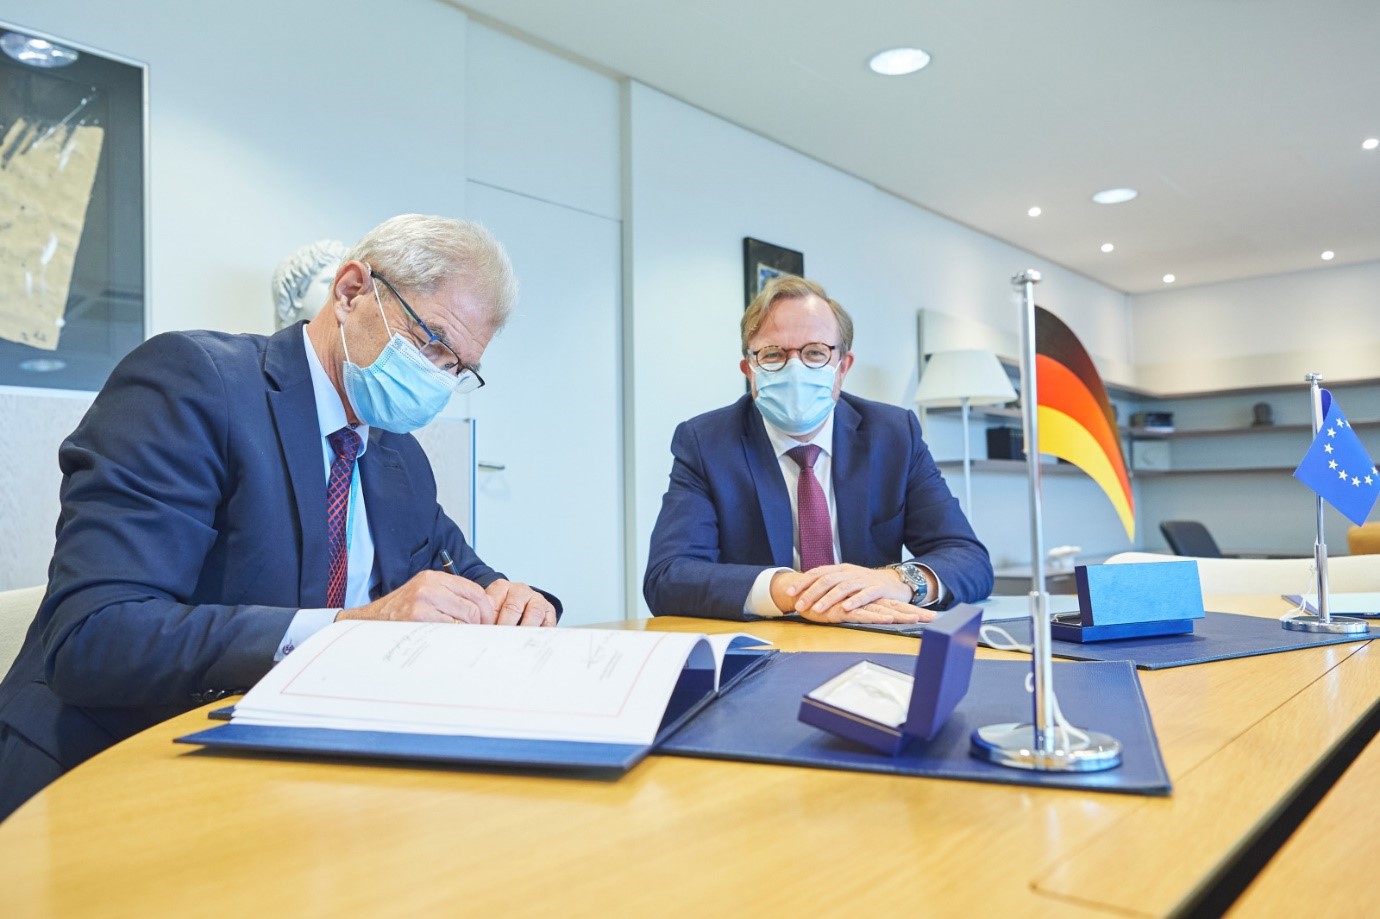 Germany signs the Convention on safety, security and service in sport